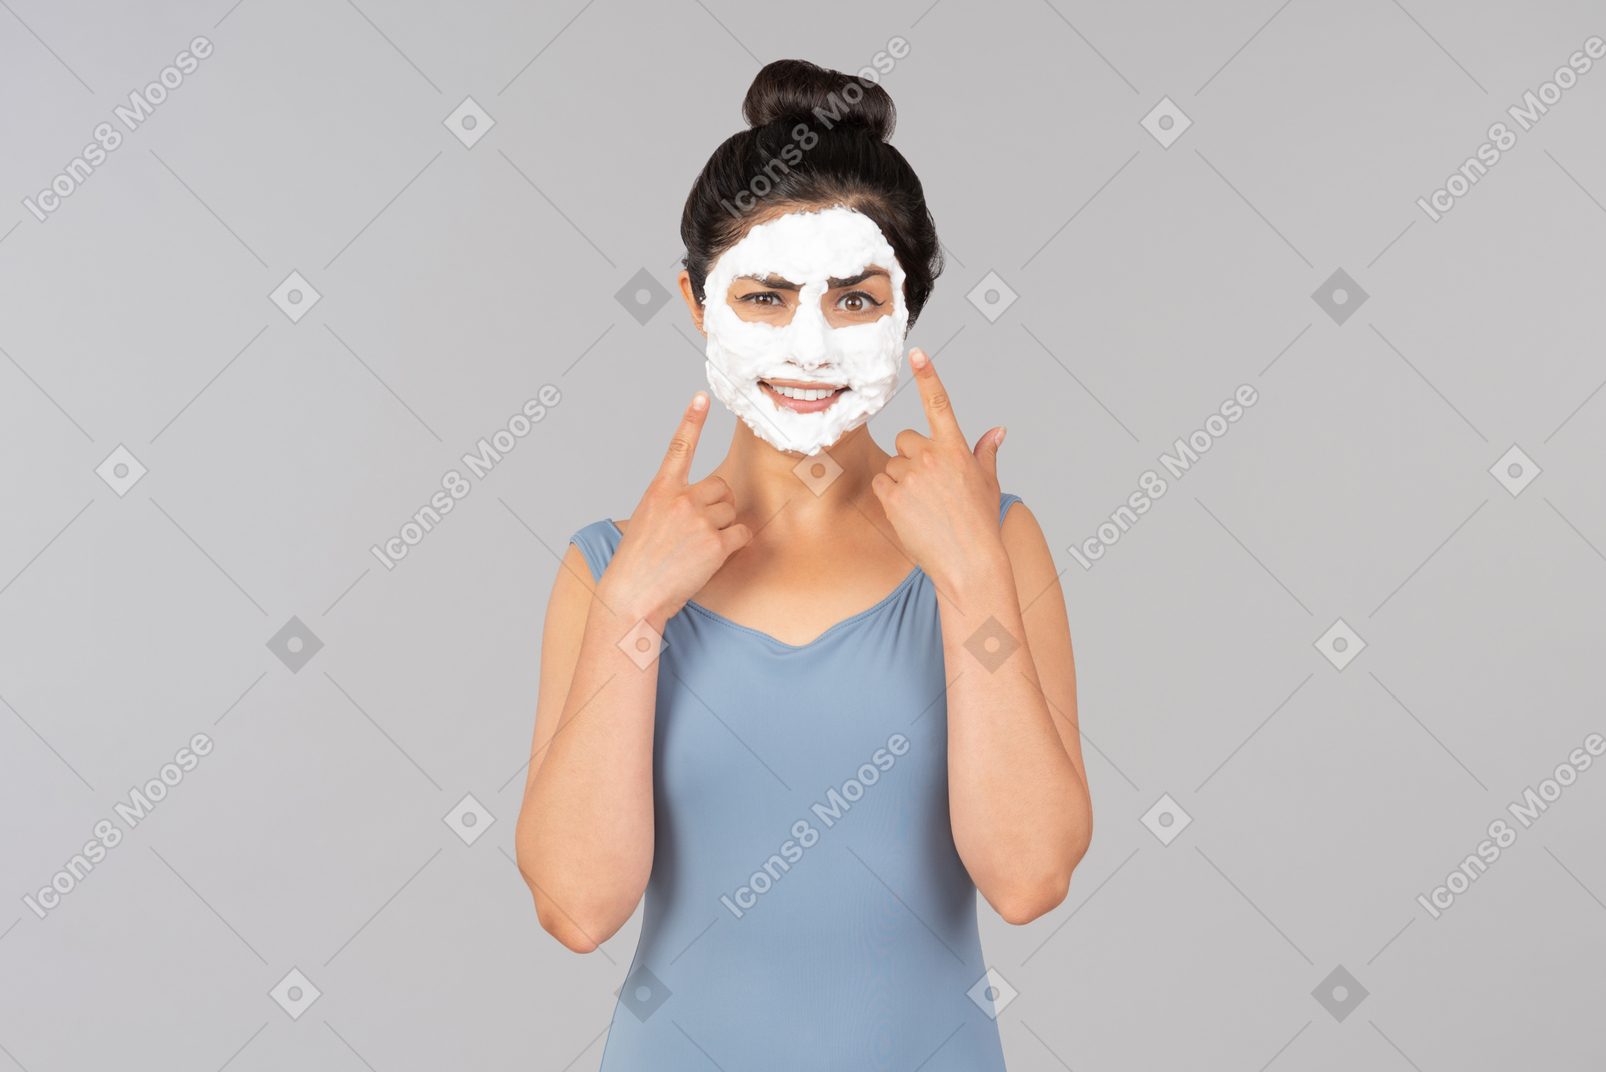 Woman with white facial mask on pointing at her face